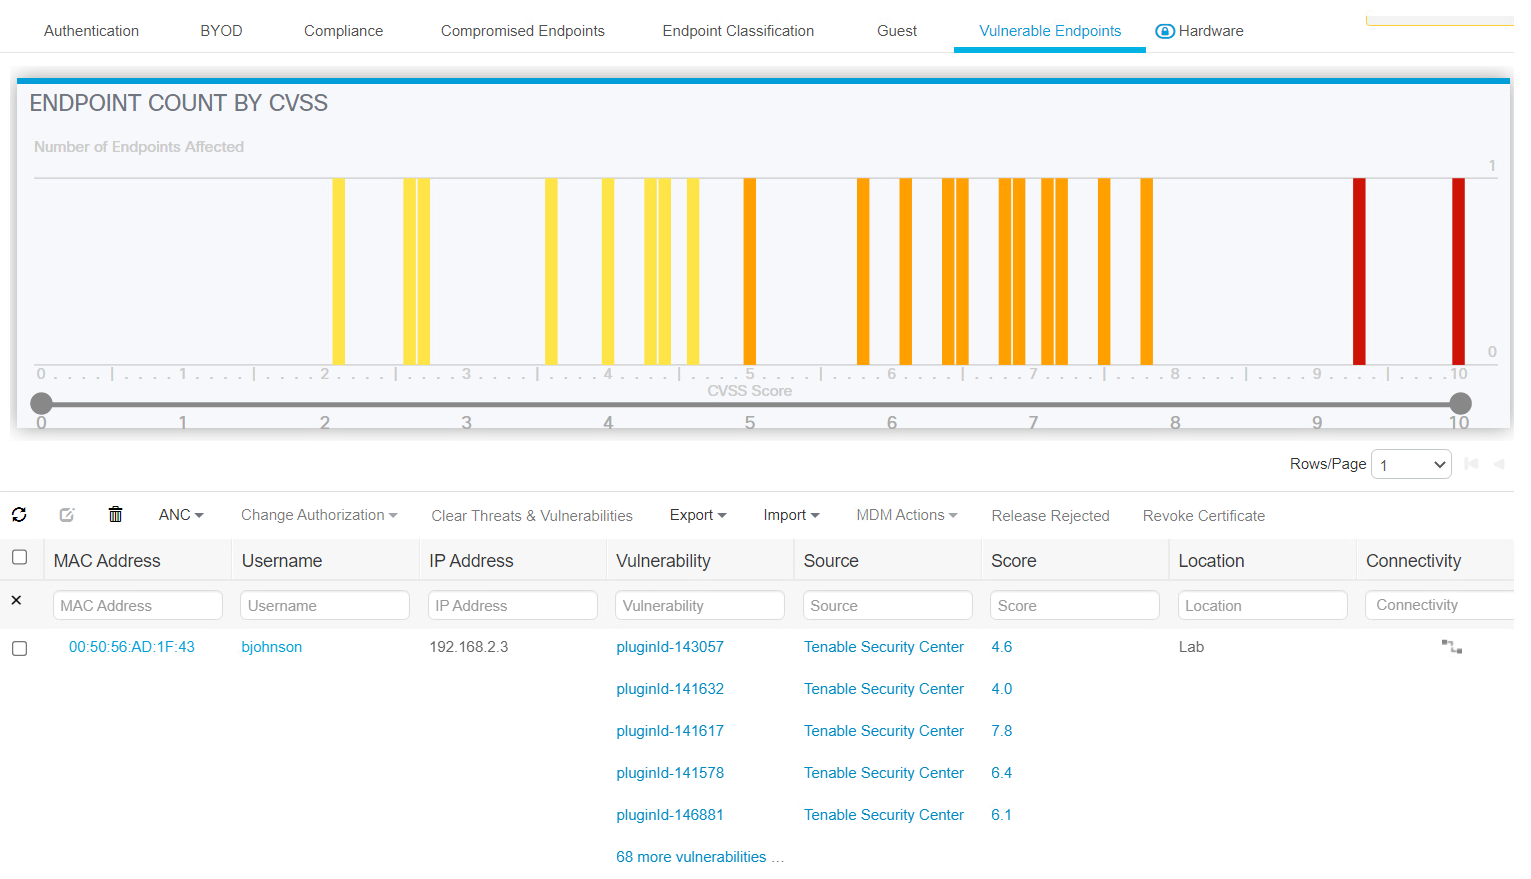 This is a screenshot of the Cisco ISE view of vulnerability data for connected devices.